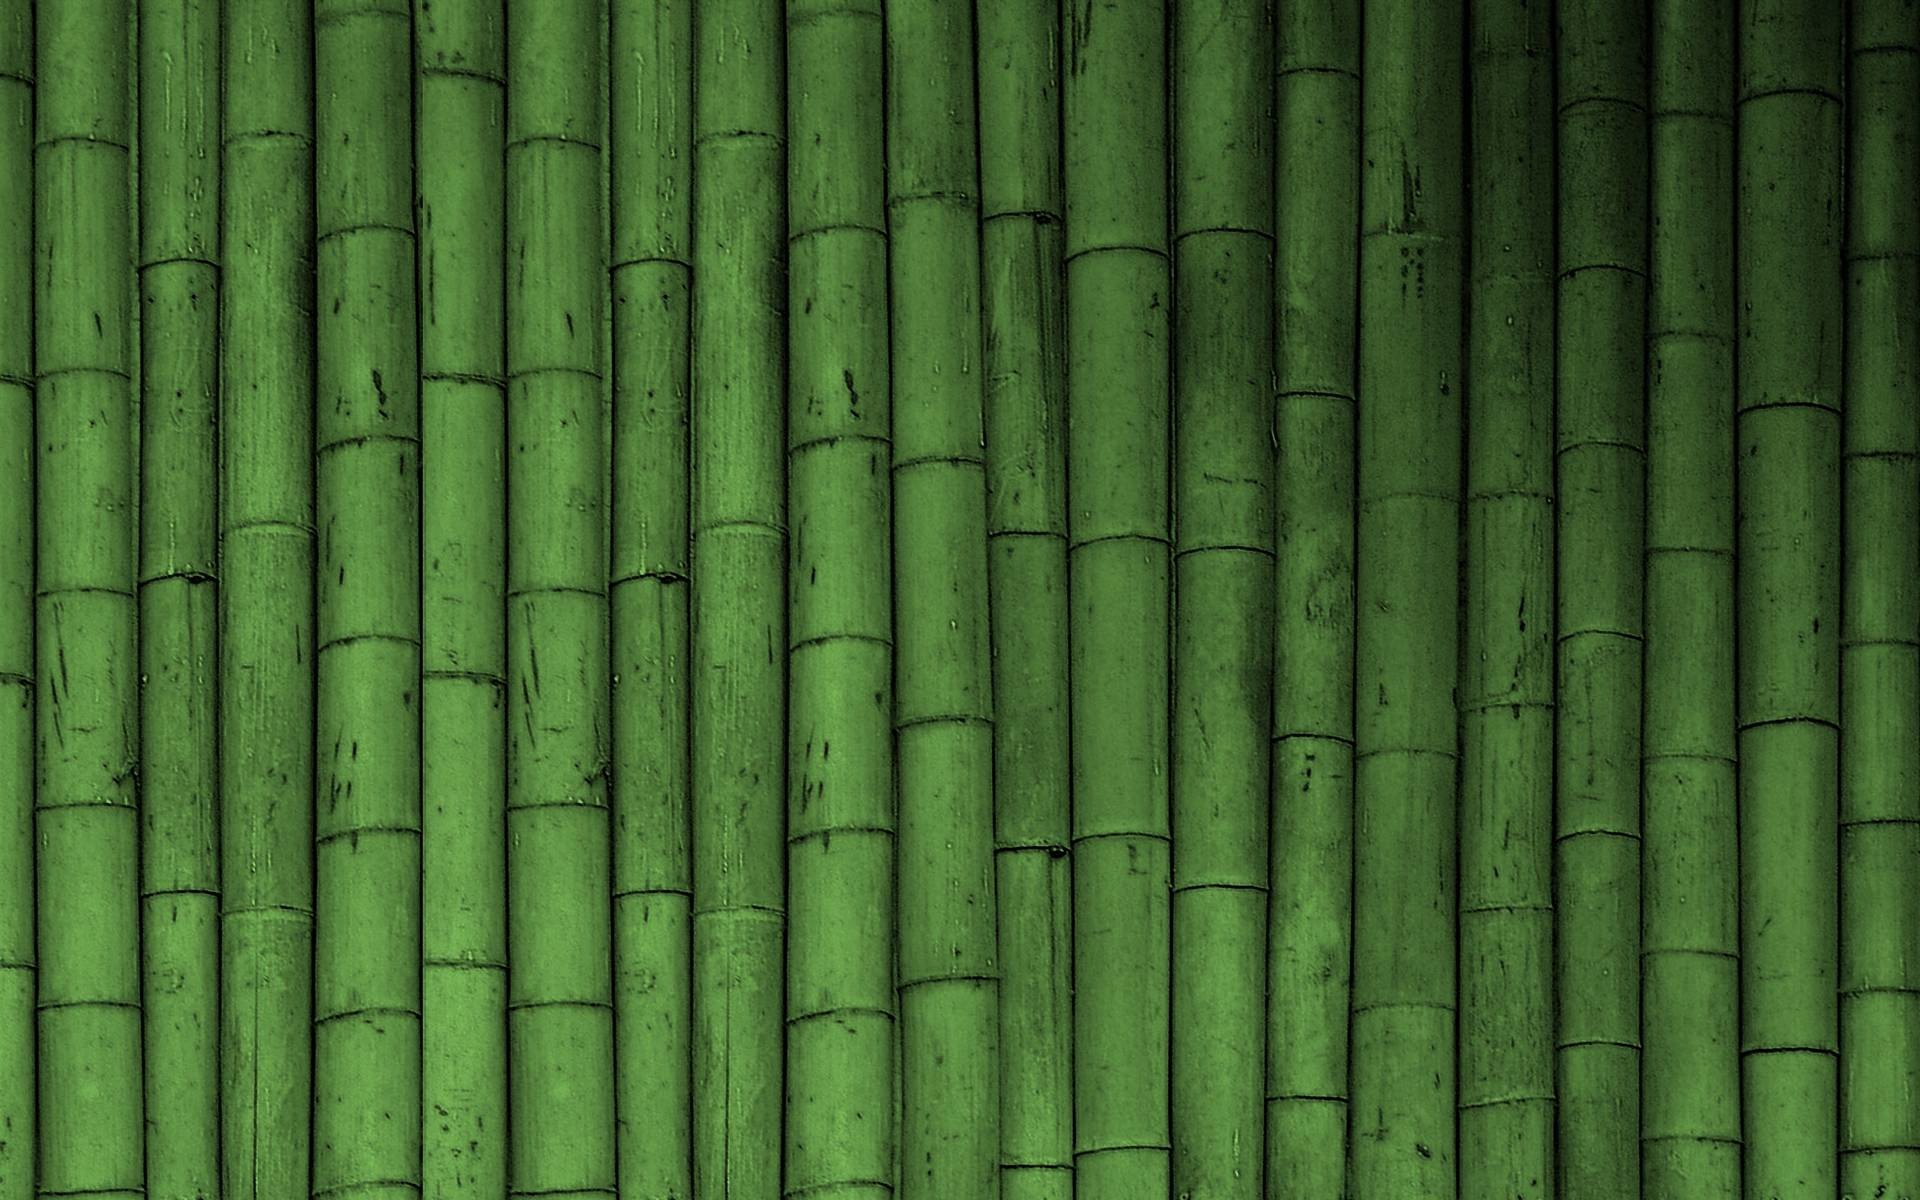 Hd Bamboo Wallpapers Download Free 1280ã800 Bamboo - Green Wallpaper Bamboo - HD Wallpaper 